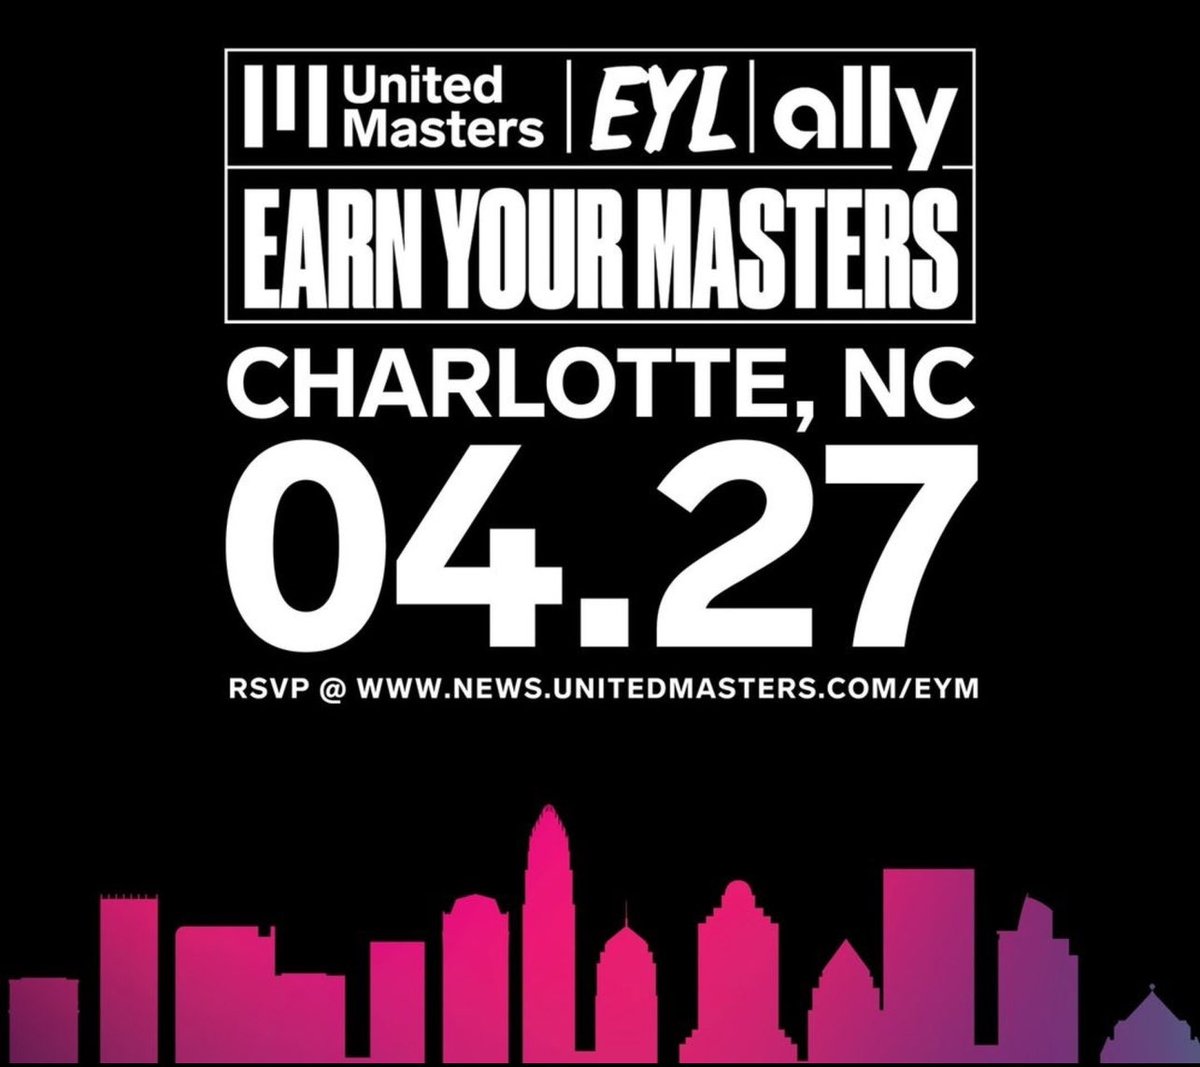 Charlotte, we're on our way! Click the link below to RSVP. We're coming with surprises, entertainment, and education per usual. This is a free event, but you must RSVP to attend. Space is limited! news.unitedmasters.com/eym